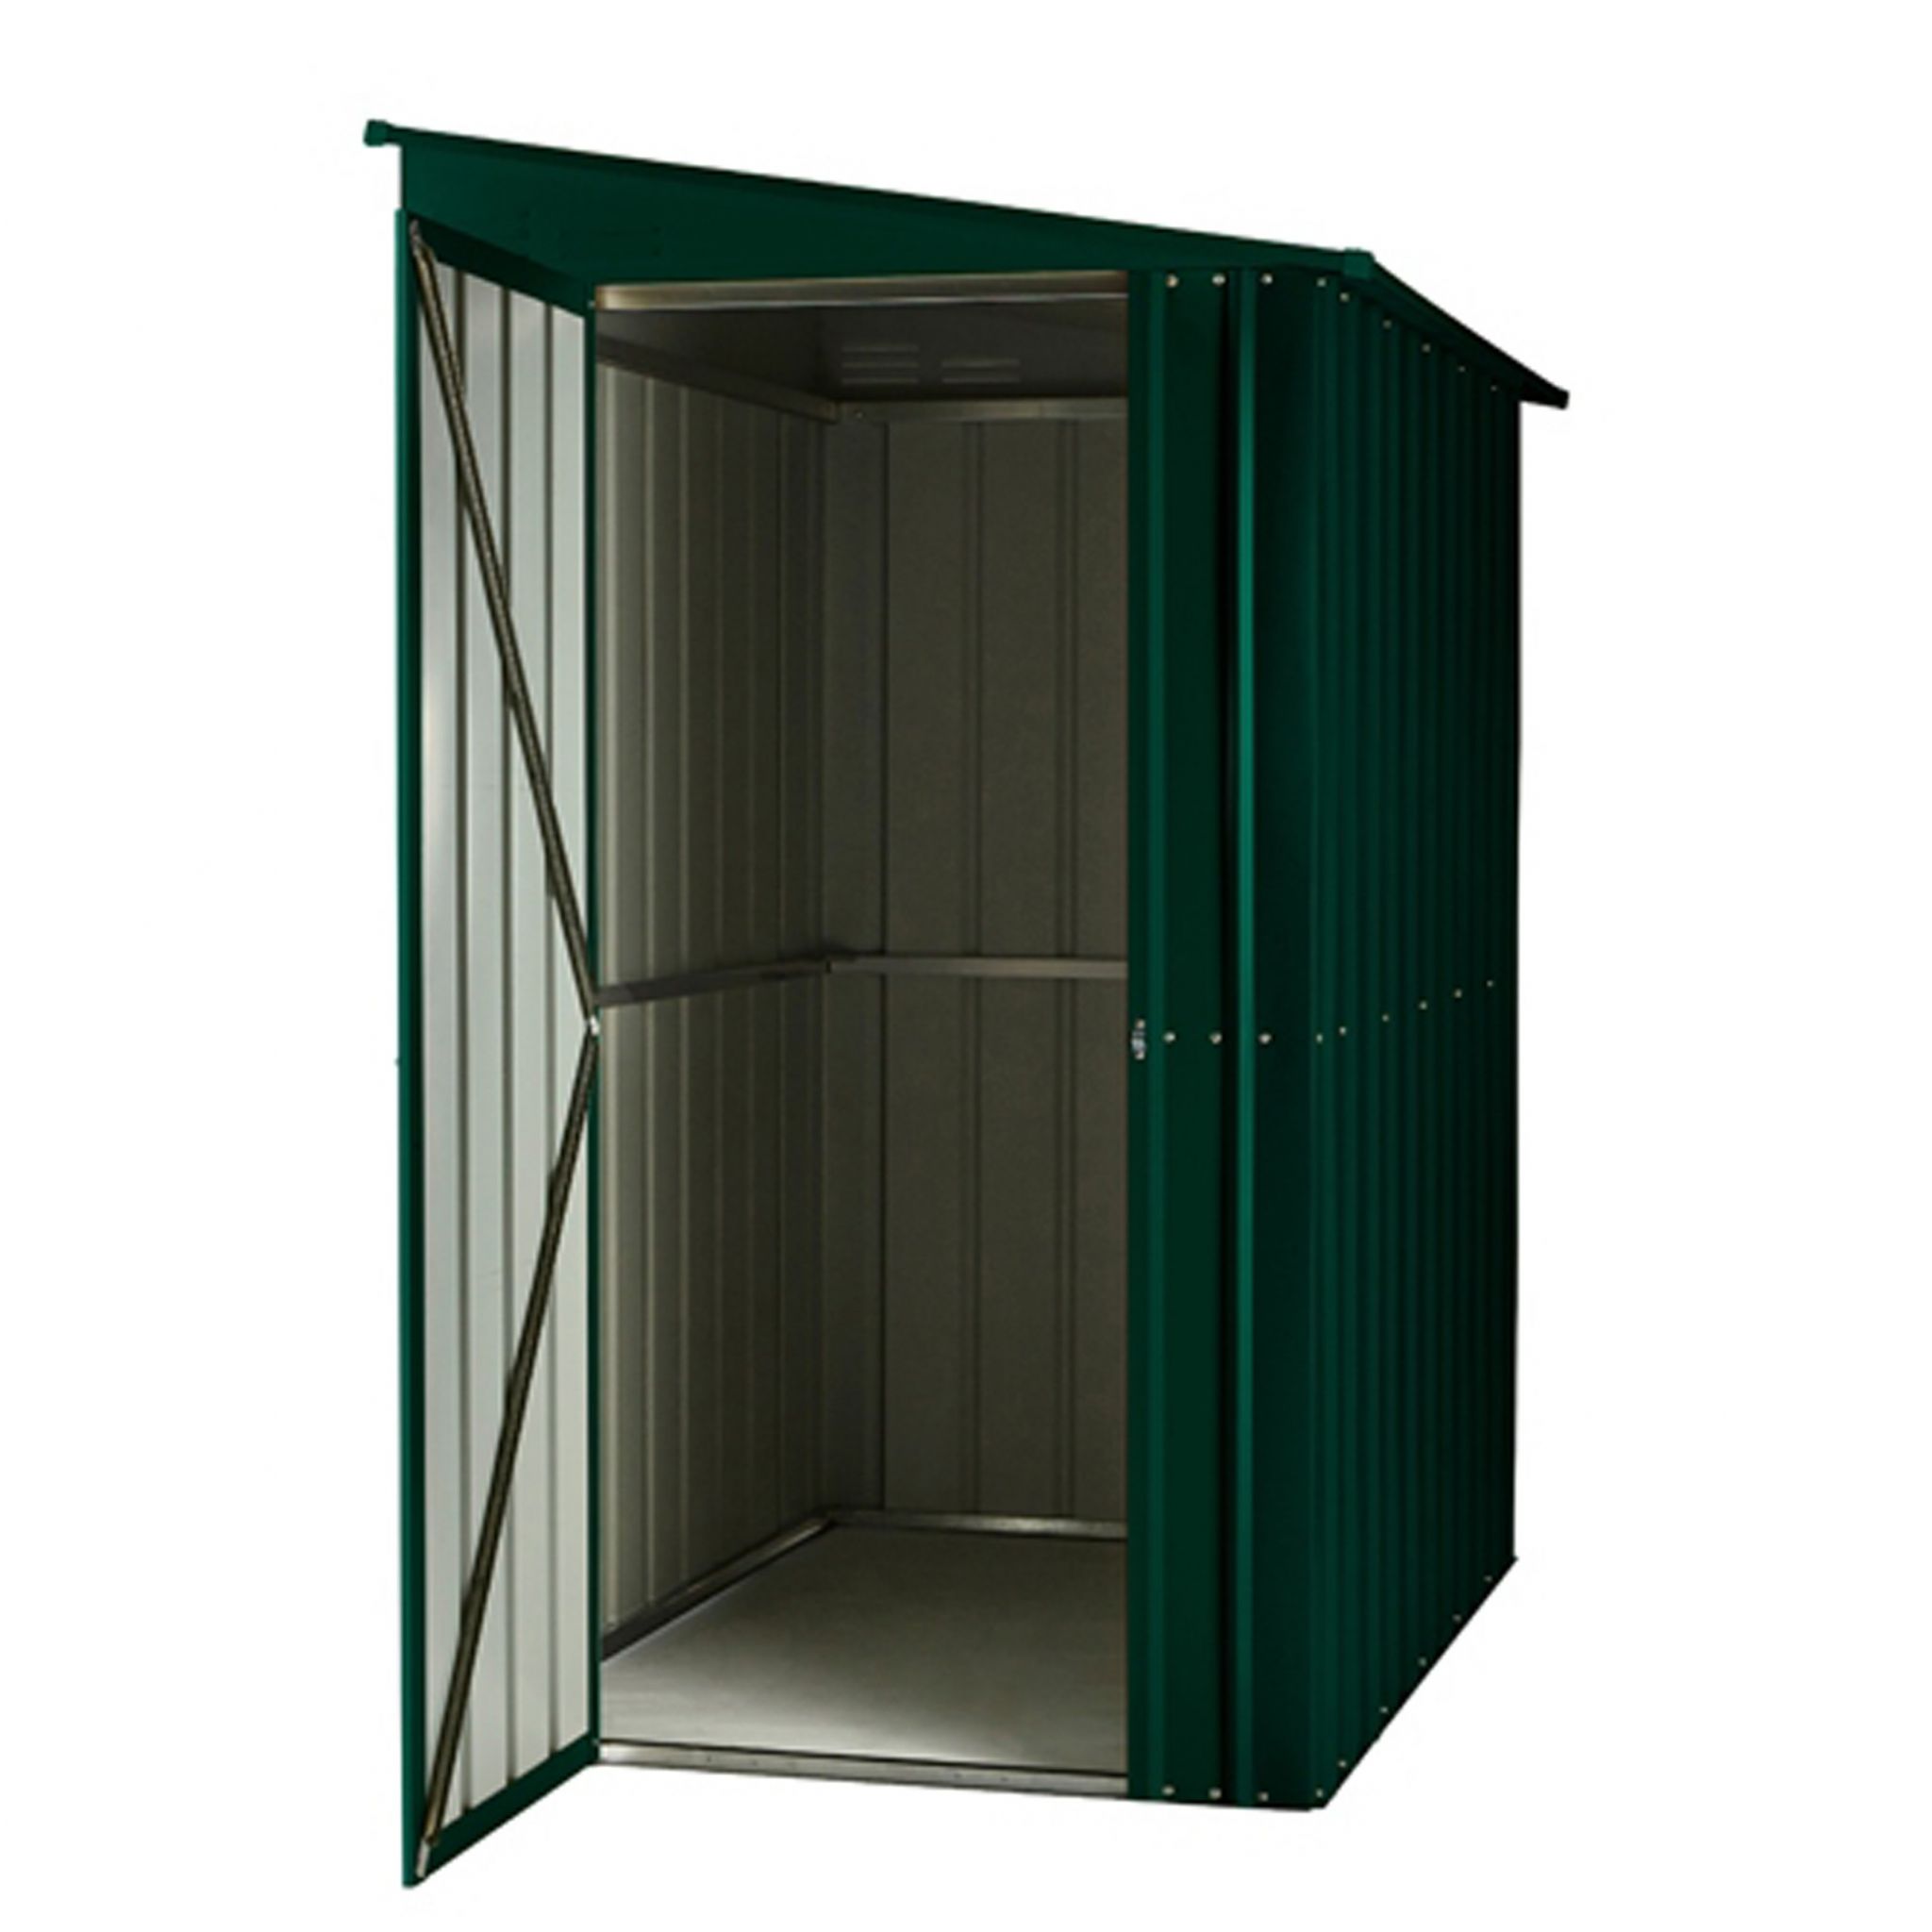 Featured image for “Globel® Lotus™ Lean-To 4x8 Steel Shed”